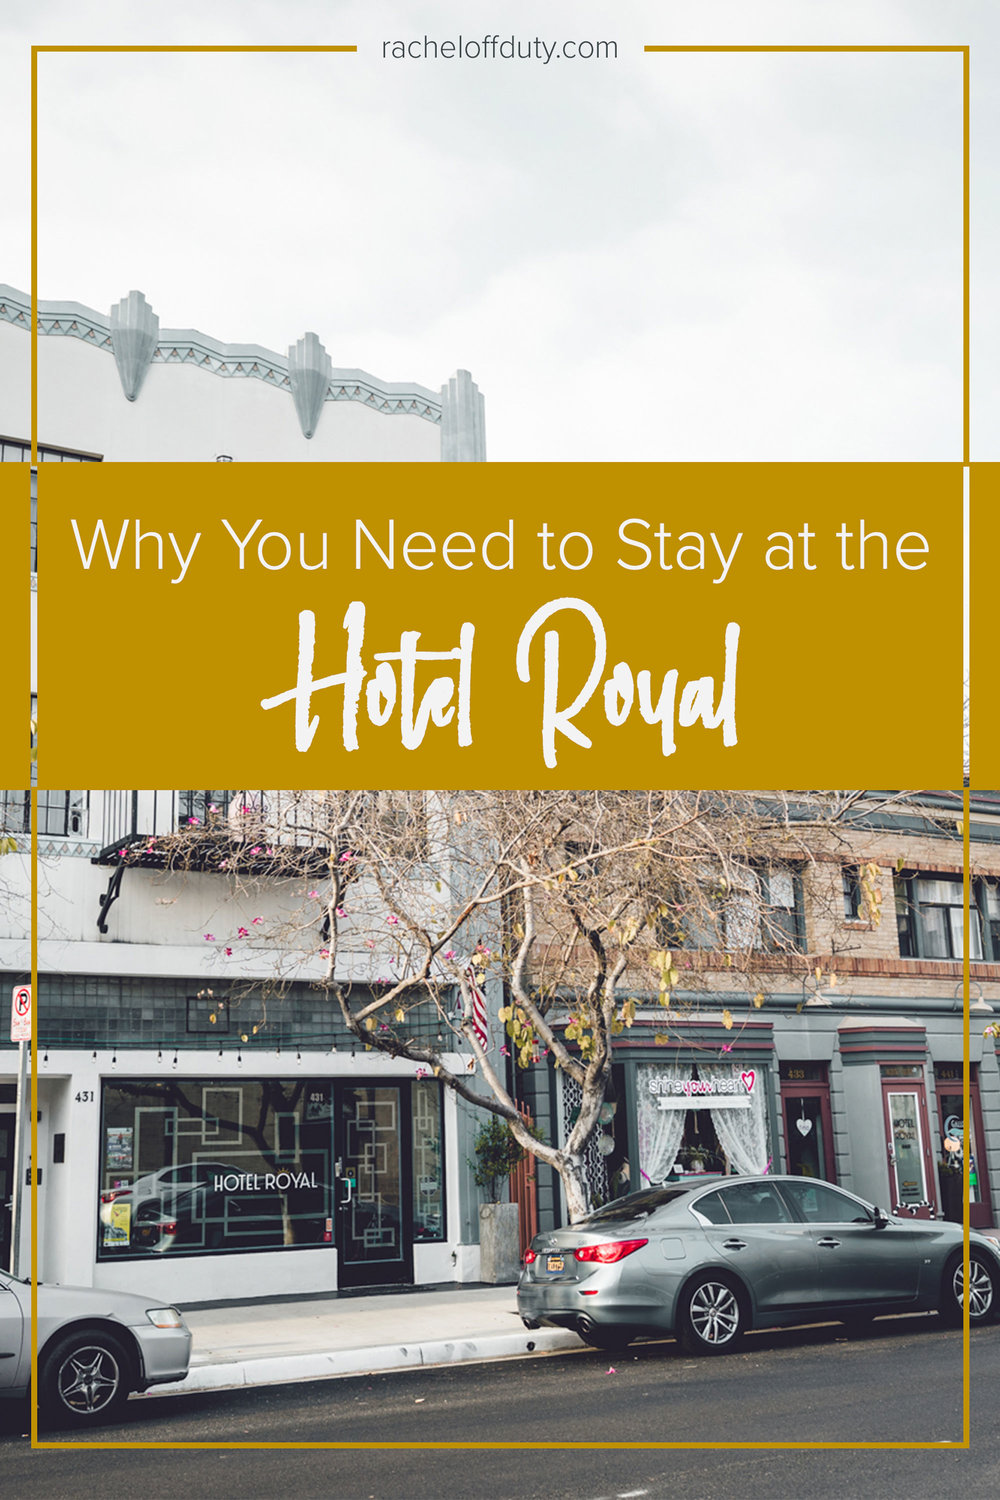 Rachel Off Duty: Where to Stay in Long Beach - The Hotel Royal Review